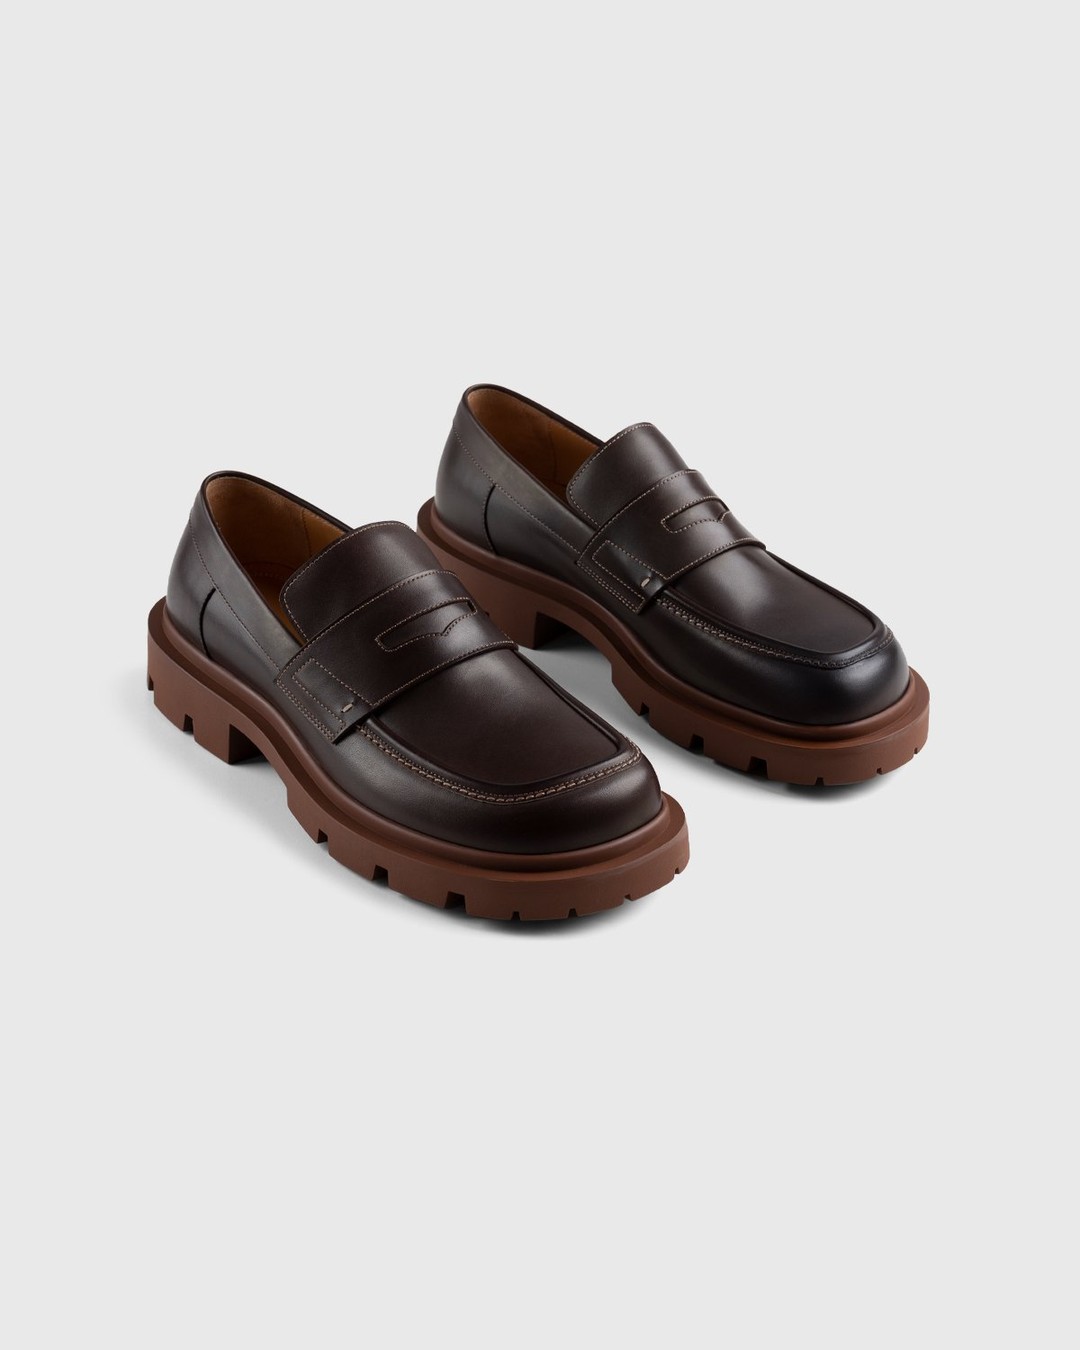 Maison Margiela – Lug Sole Loafers Brown - Shoes - Brown - Image 4